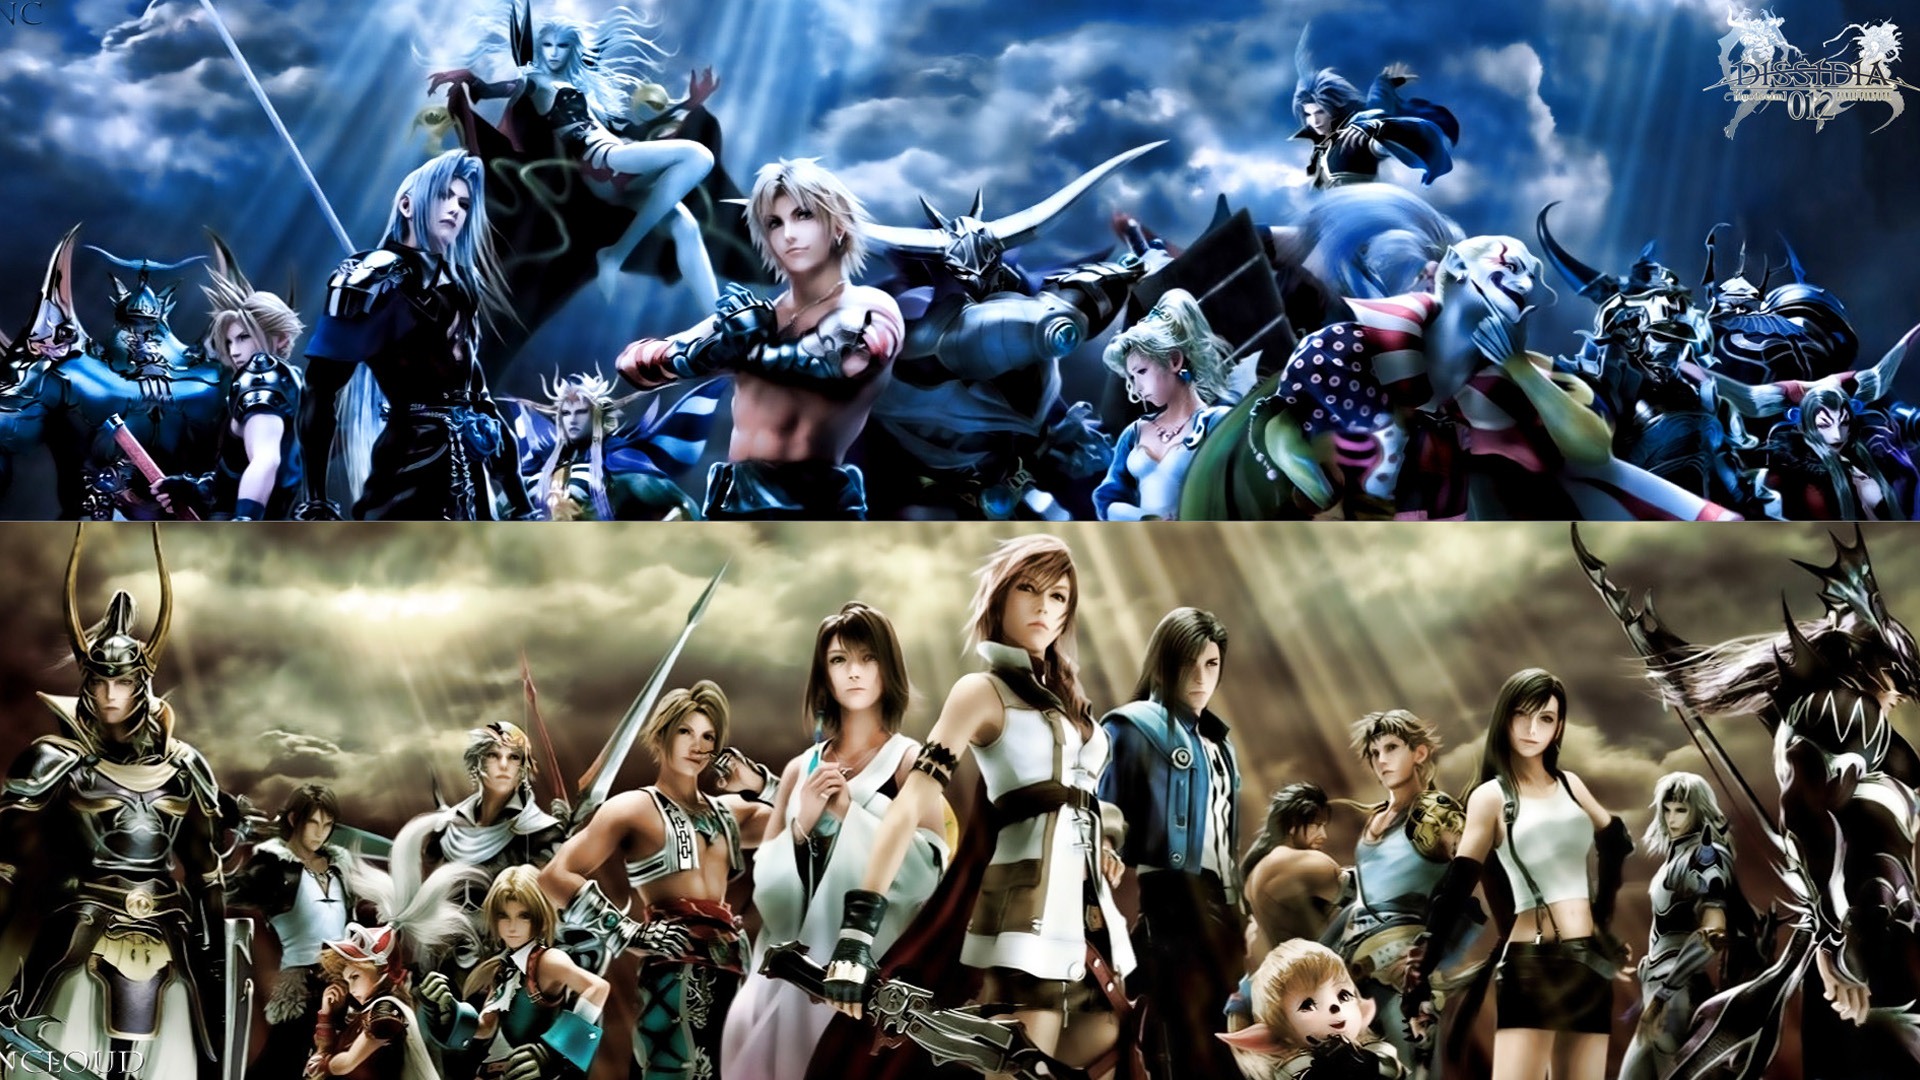 Free Download Final Fantasy Hd Wallpapers 19x1080 For Your Desktop Mobile Tablet Explore 77 Ff Wallpaper Ffxiii Wallpaper Ffxi Wallpaper Lightning Ff Wallpaper